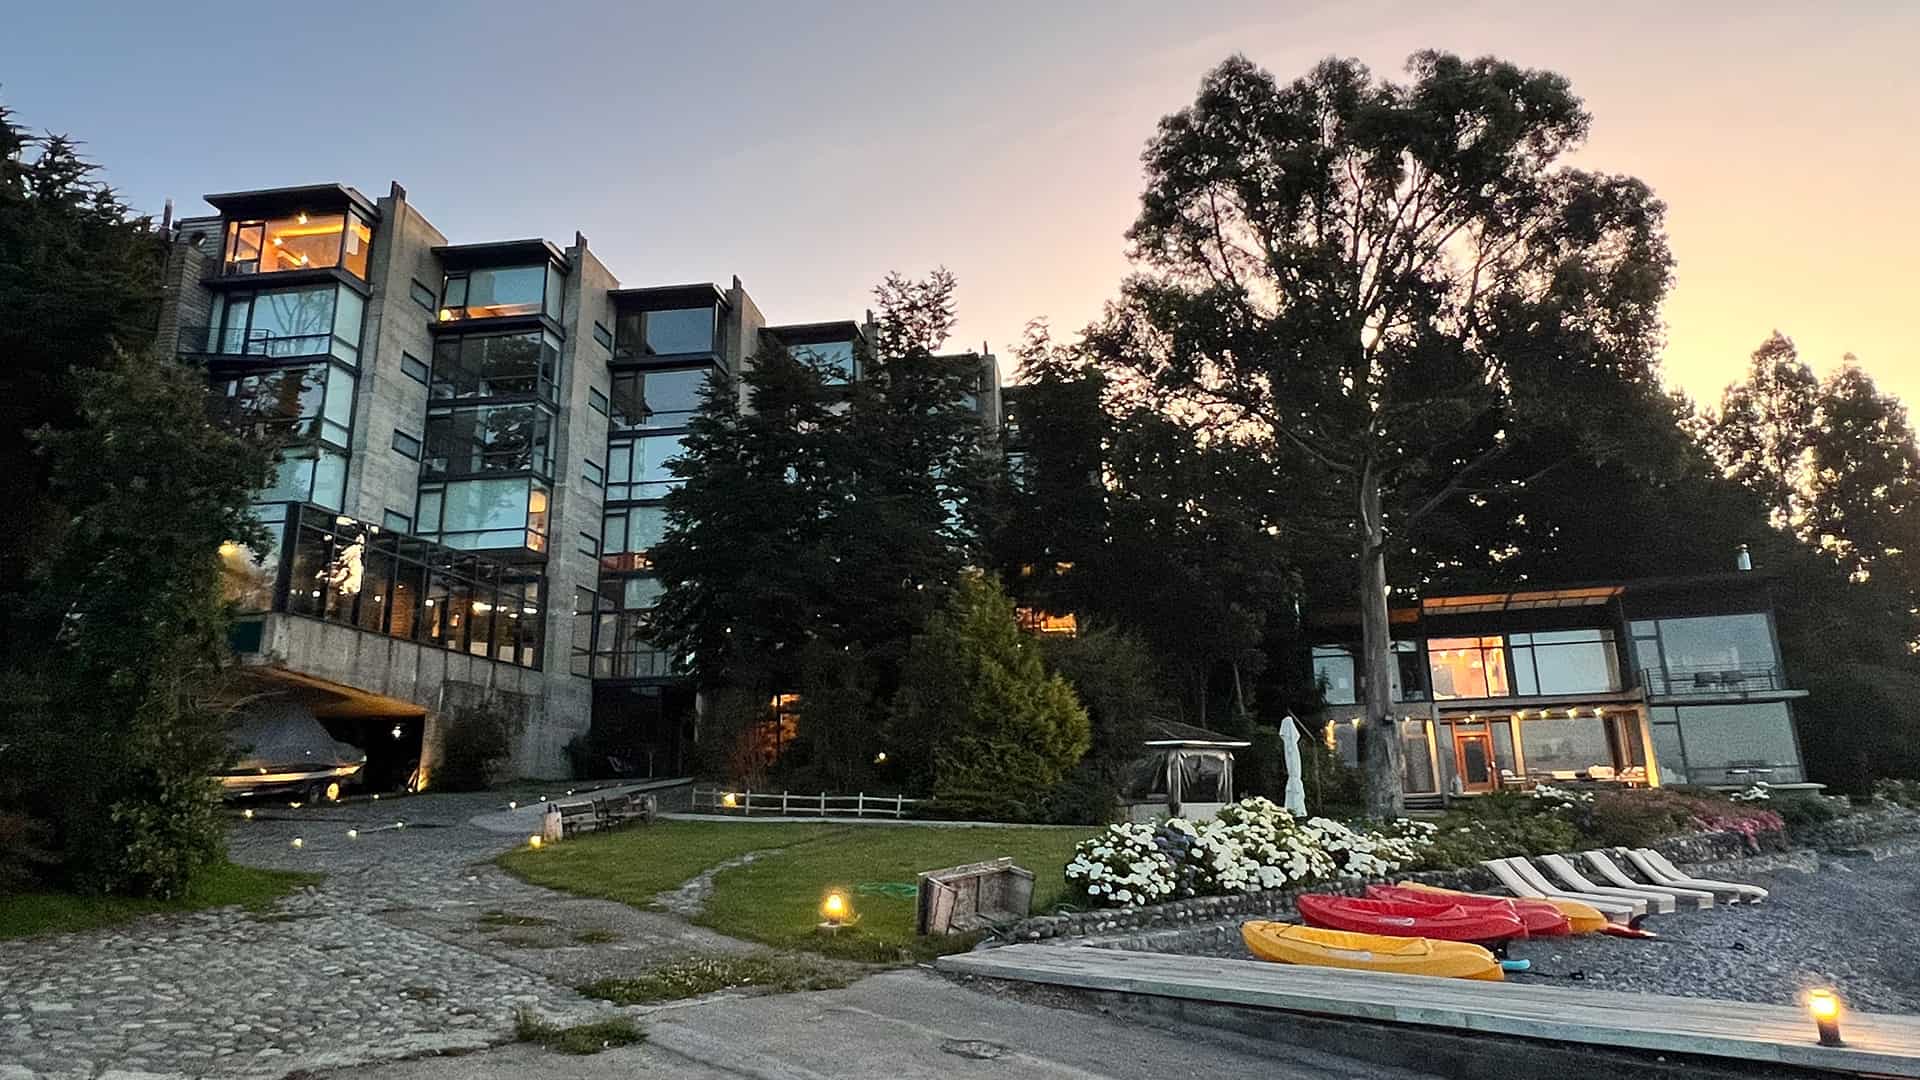 View of AWA hotel at dusk from outside showing windows and landscape